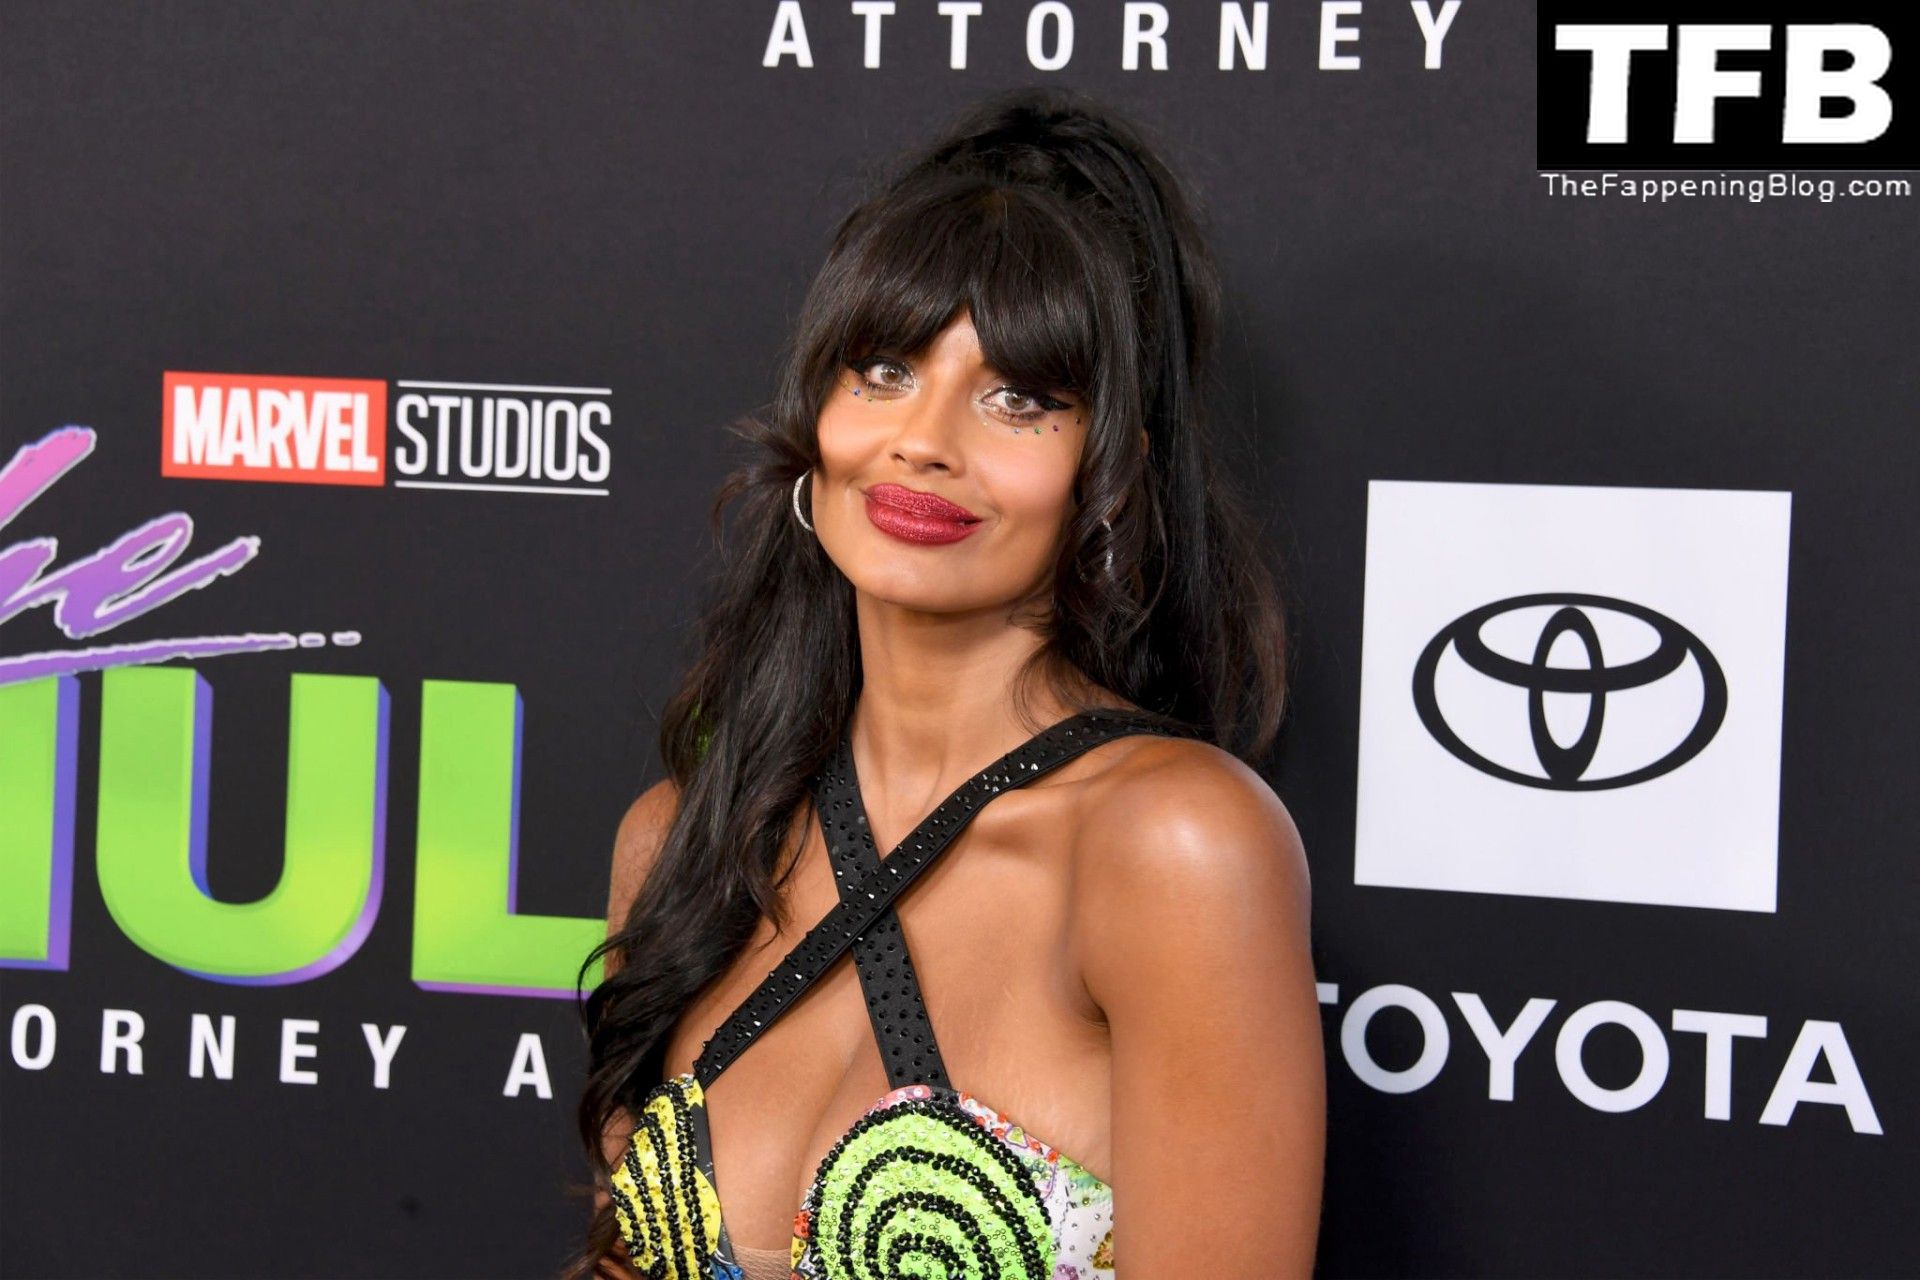 Jameela Jamil Sexy The Fappening Blog 41 - Jameela Jamil Flaunts Her Big Tits at the Premiere of Disney+’s “She Hulk: Attorney at Law” in LA (53 Photos)